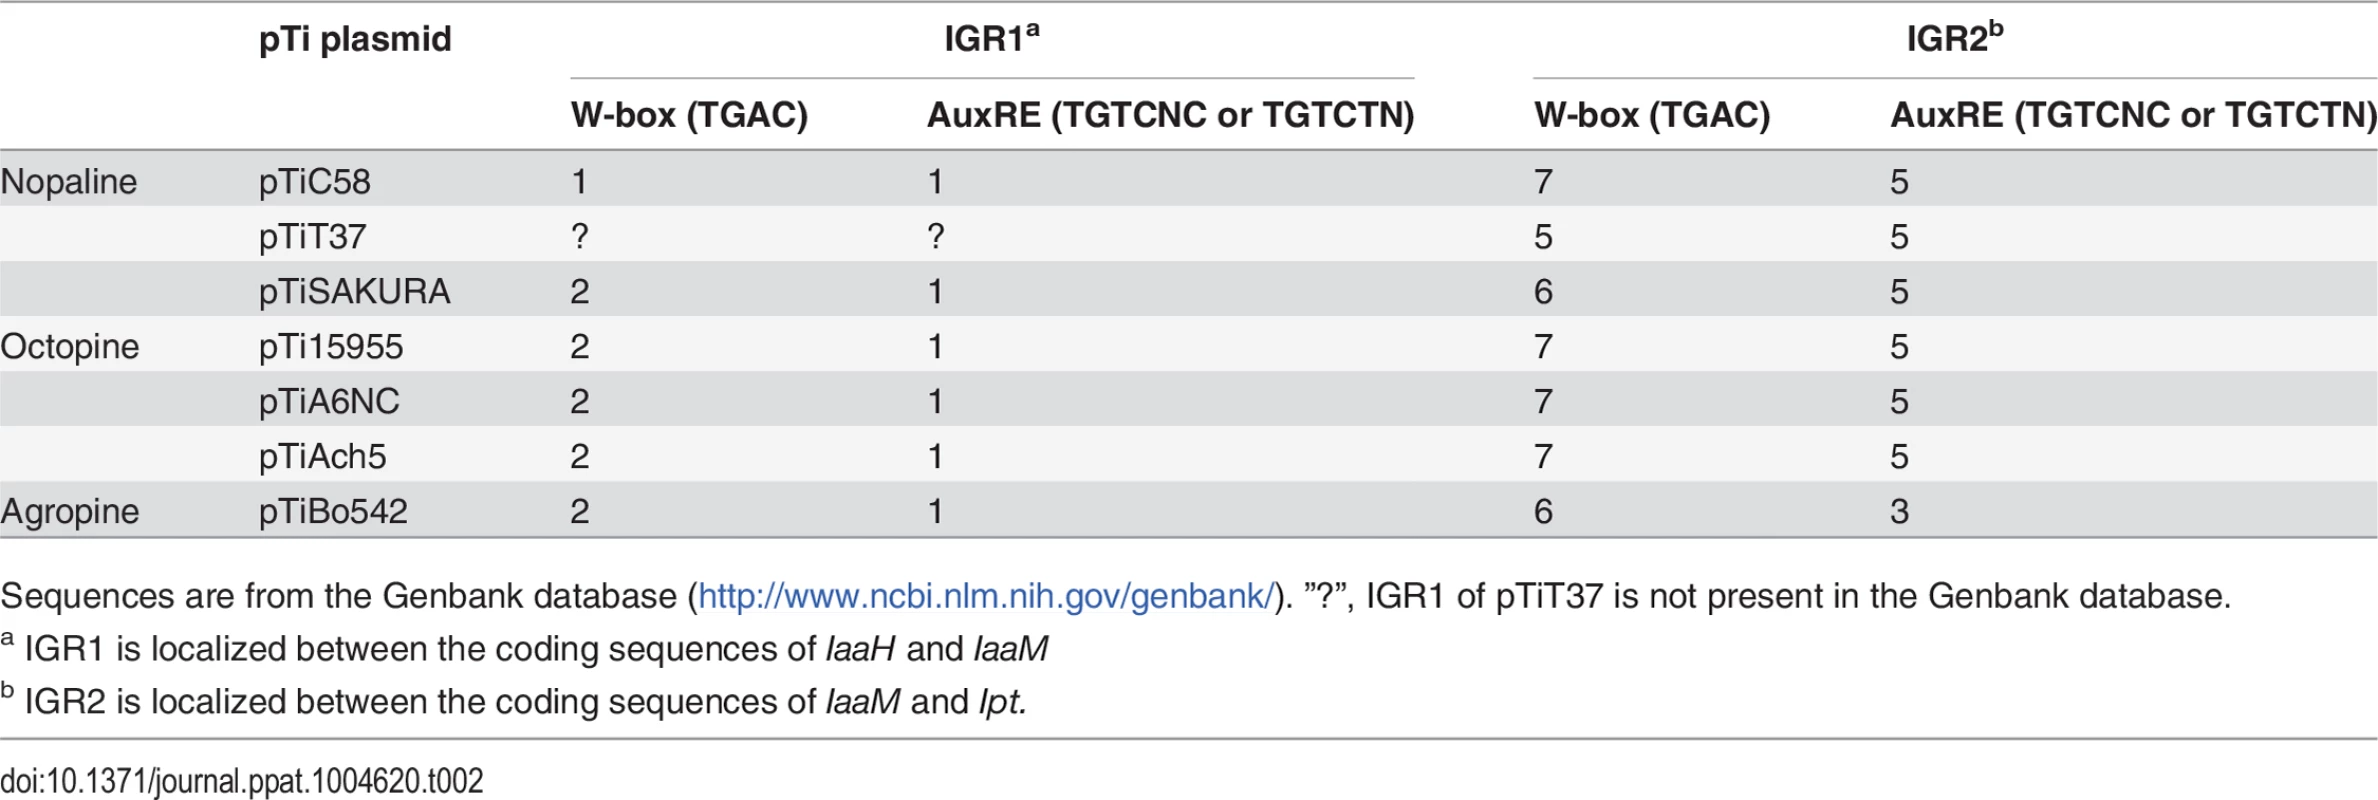 Number of WRKY-boxes (W-boxes) and auxin response elements (AuxREs) within the intergenic regions (IGRs) of the tumor inducing (Ti) plasmids from different <i>A. tumefaciens</i> strains.